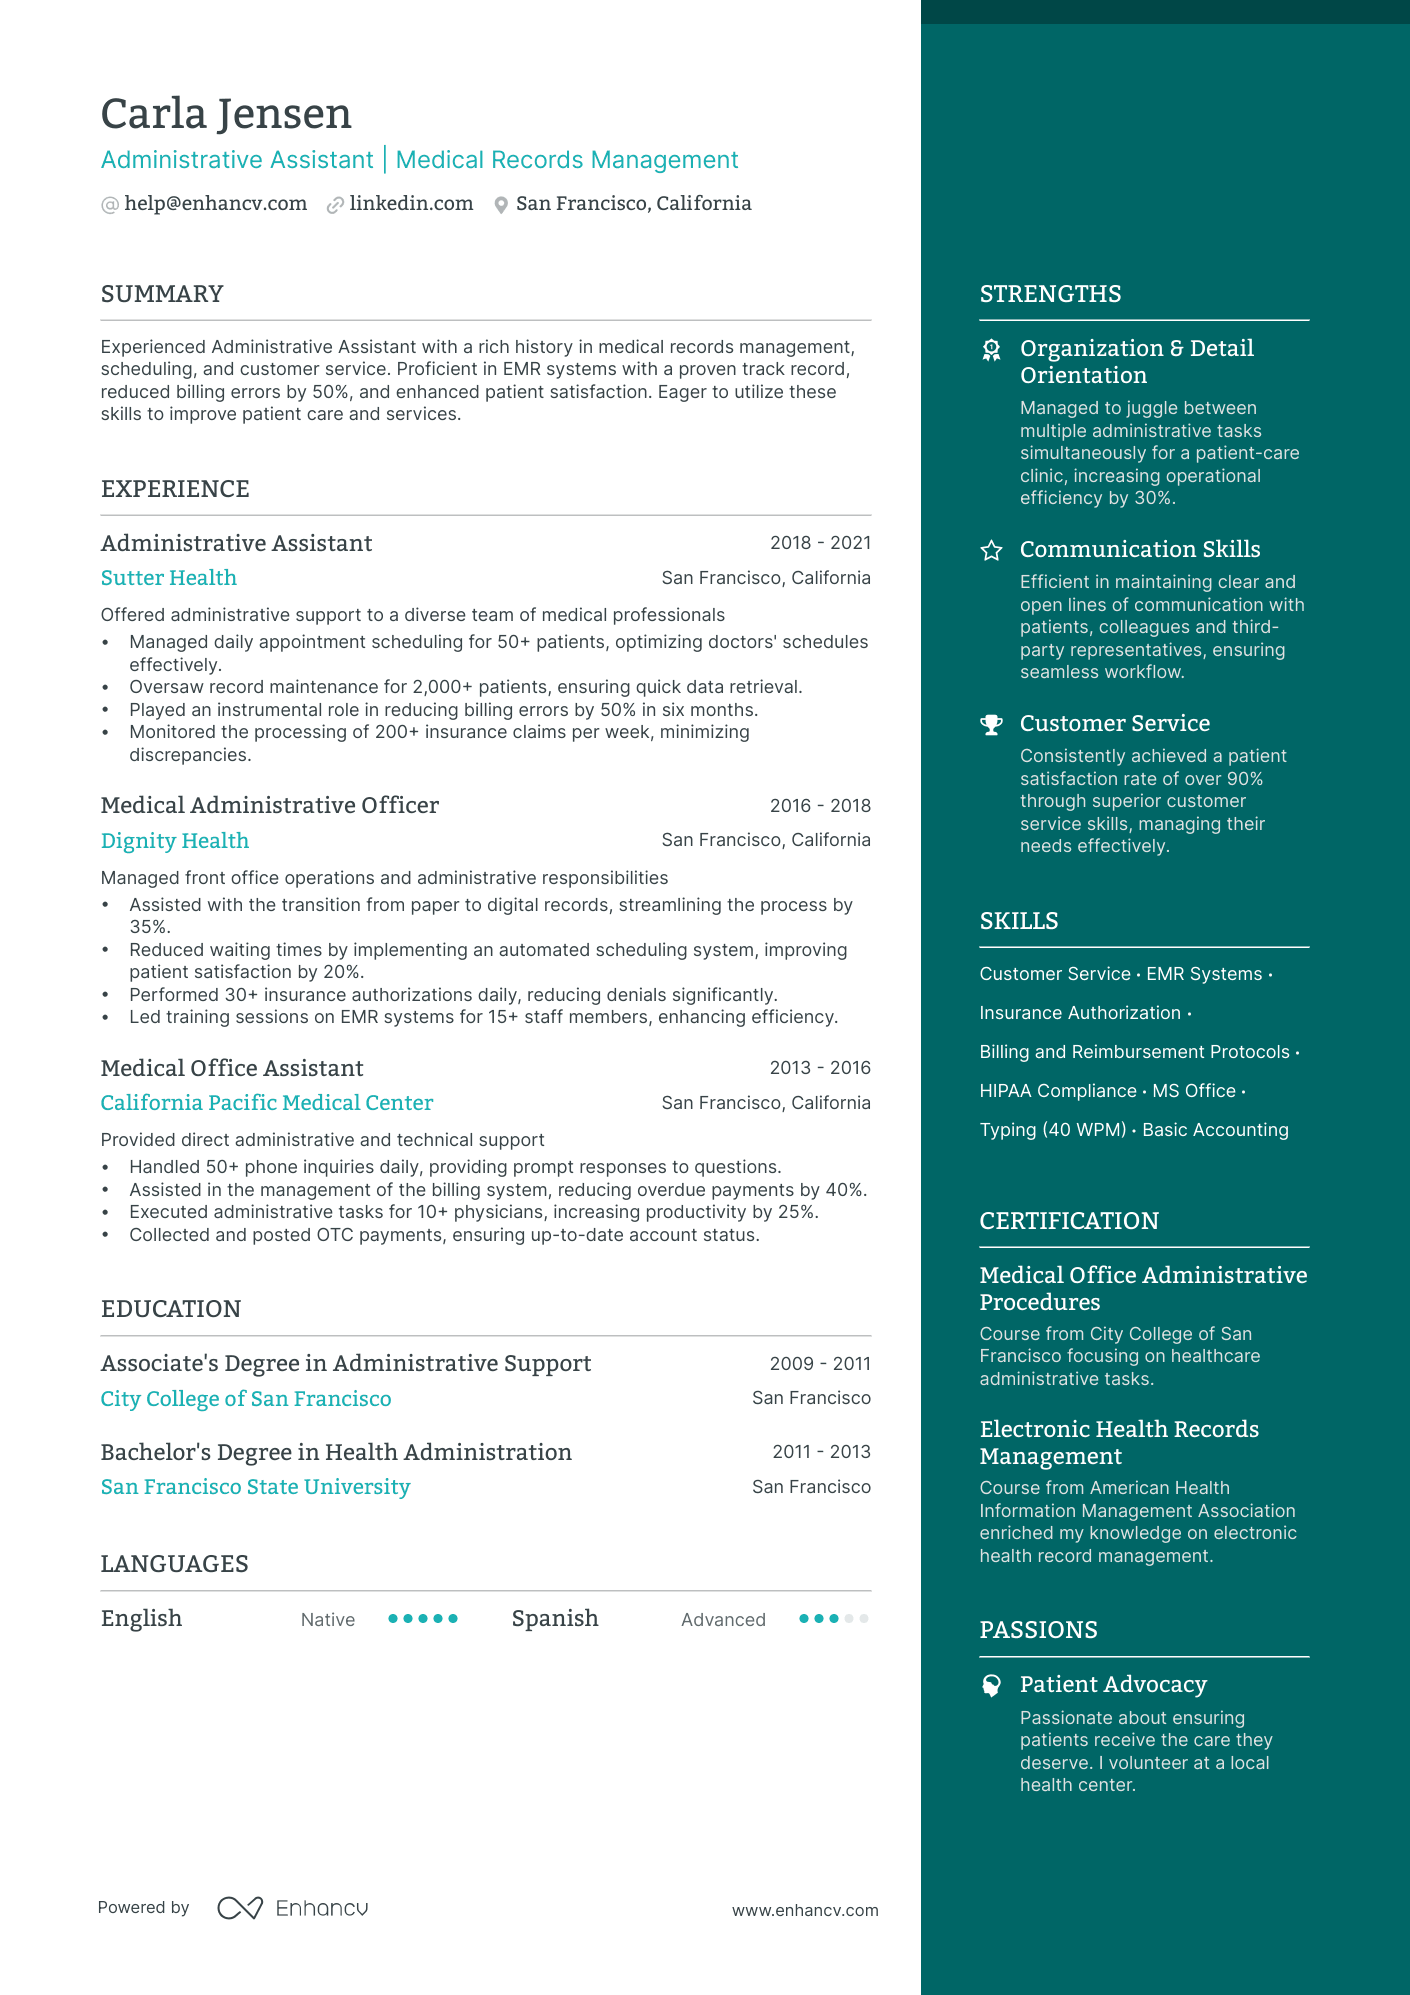 Medical Office Administrator resume example